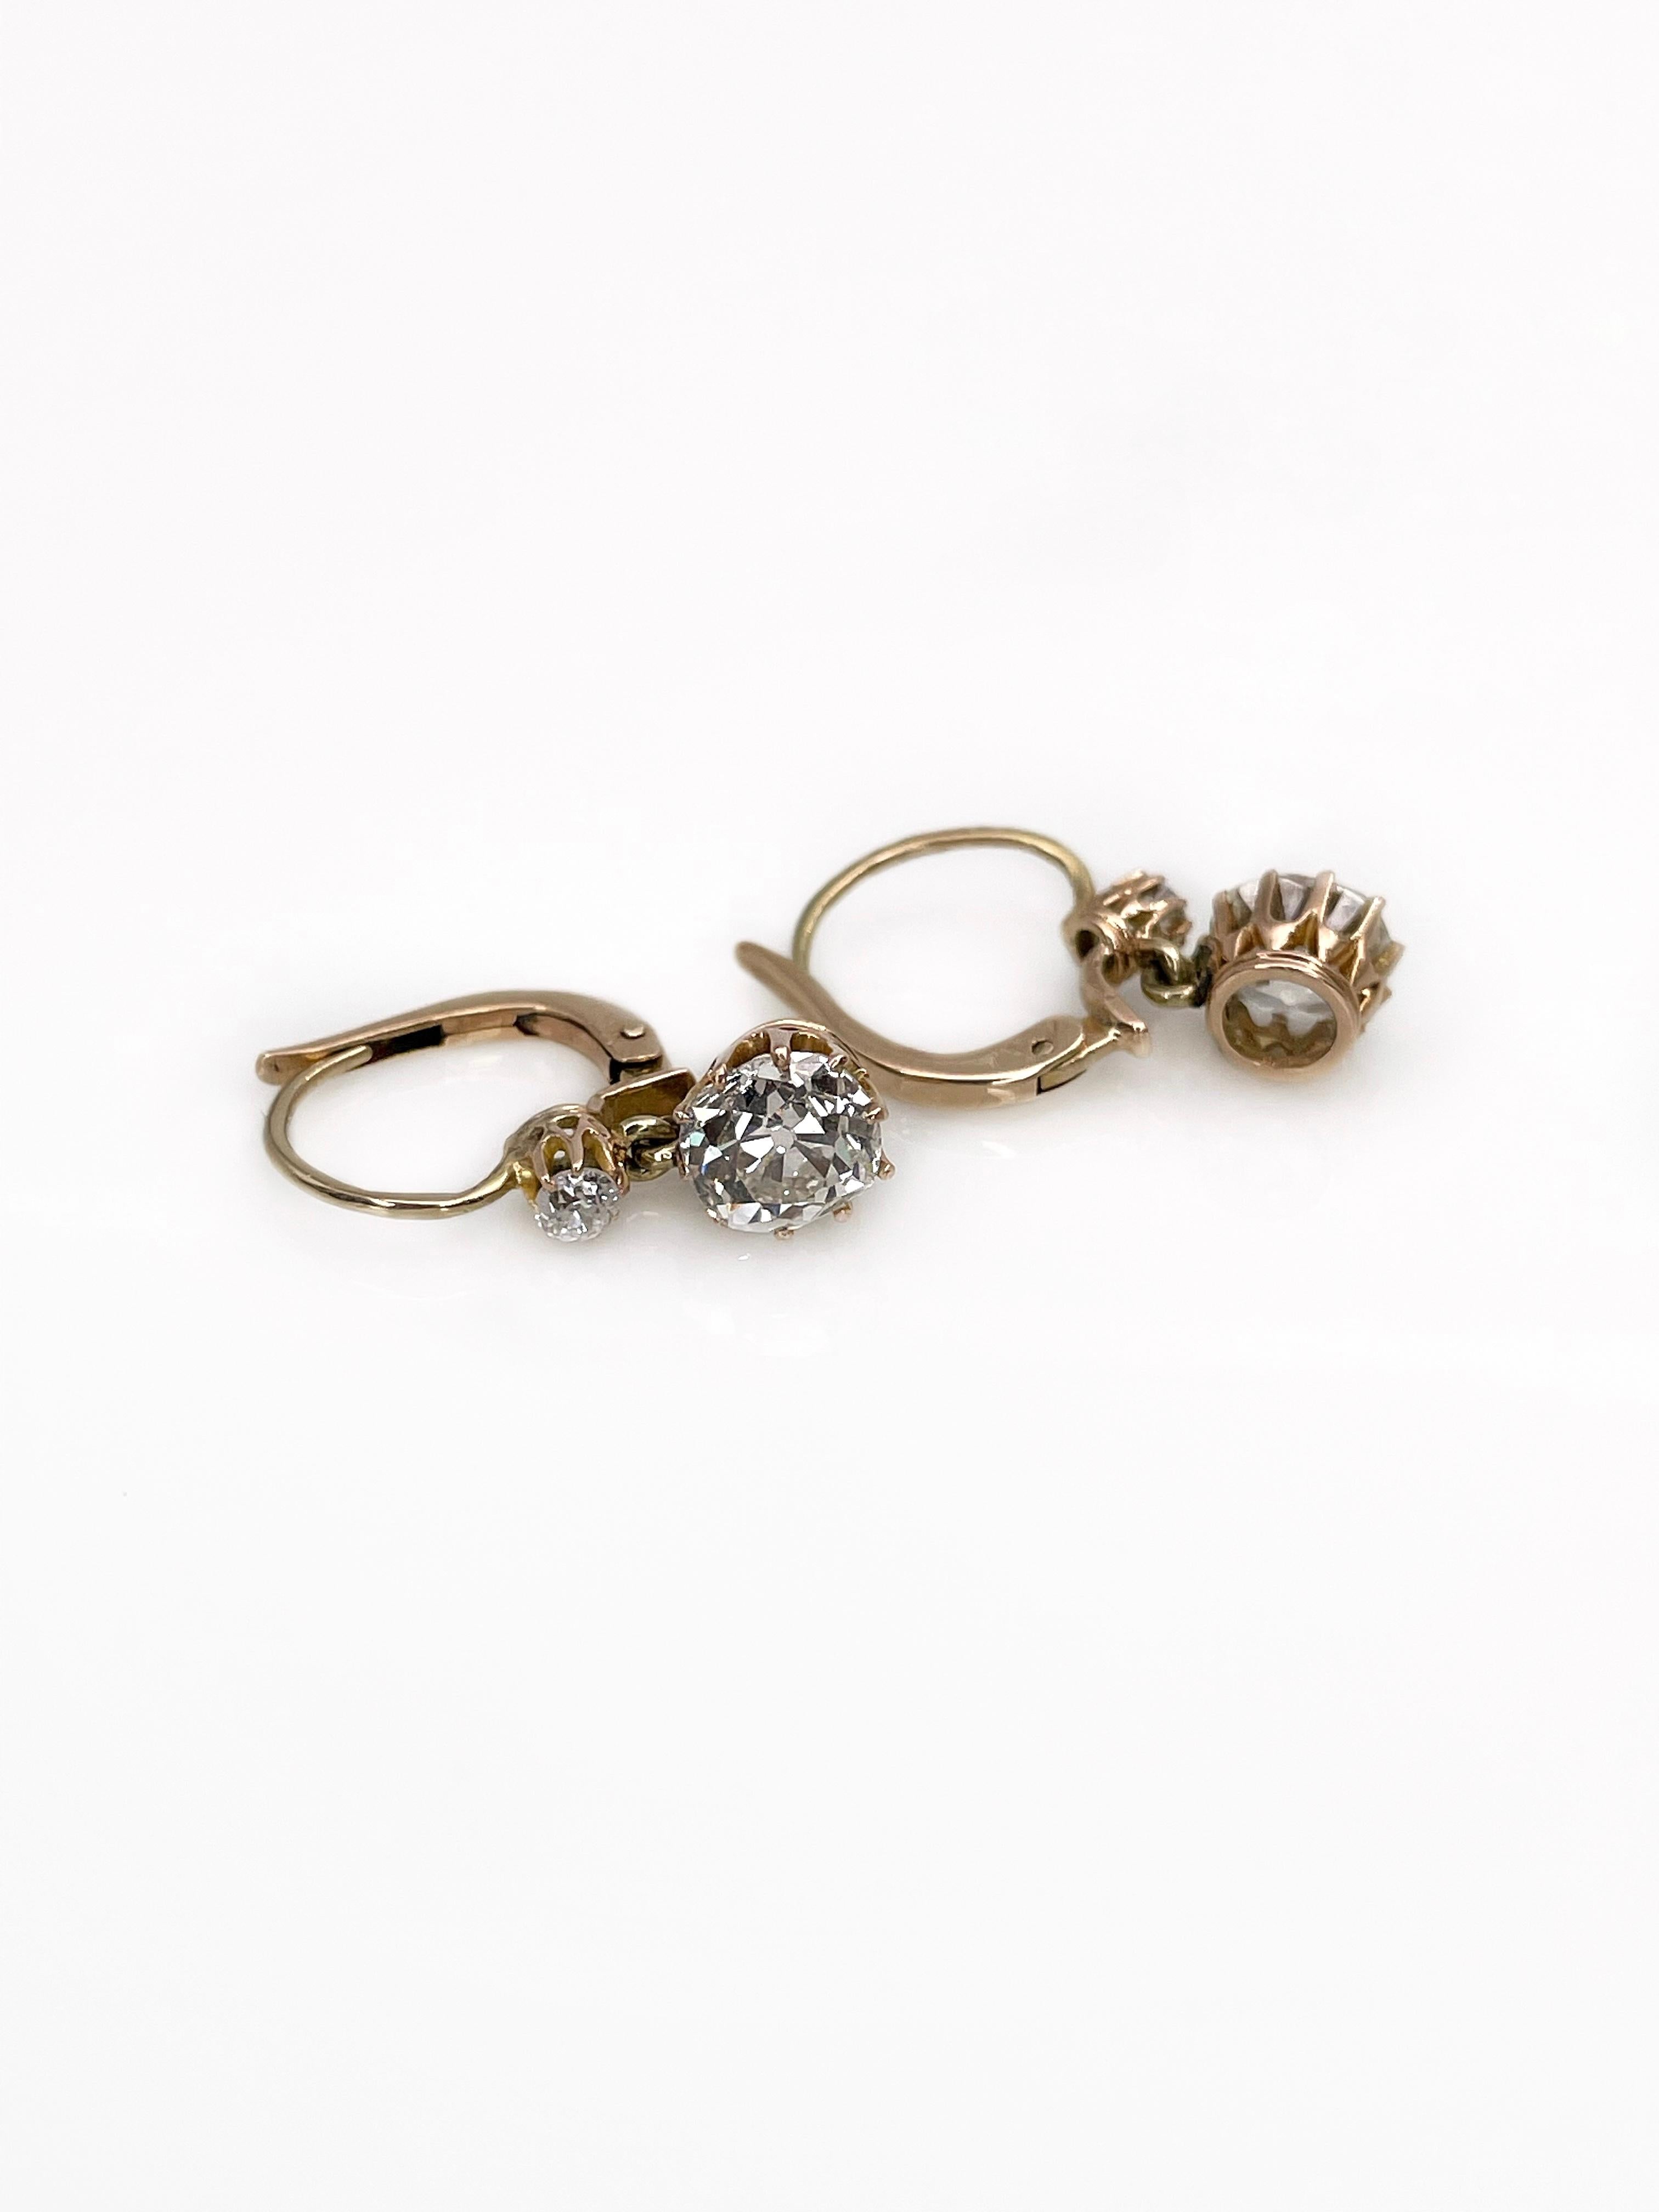 This is a gorgeous pair of lever back earrings crafted in 14K yellow gold. It features 4 round old cut diamonds which in total weight 2.30ct. The colour of the gems is W-Tinted W and the clarity - VS/SI. 

This antique piece has a dynamic design and